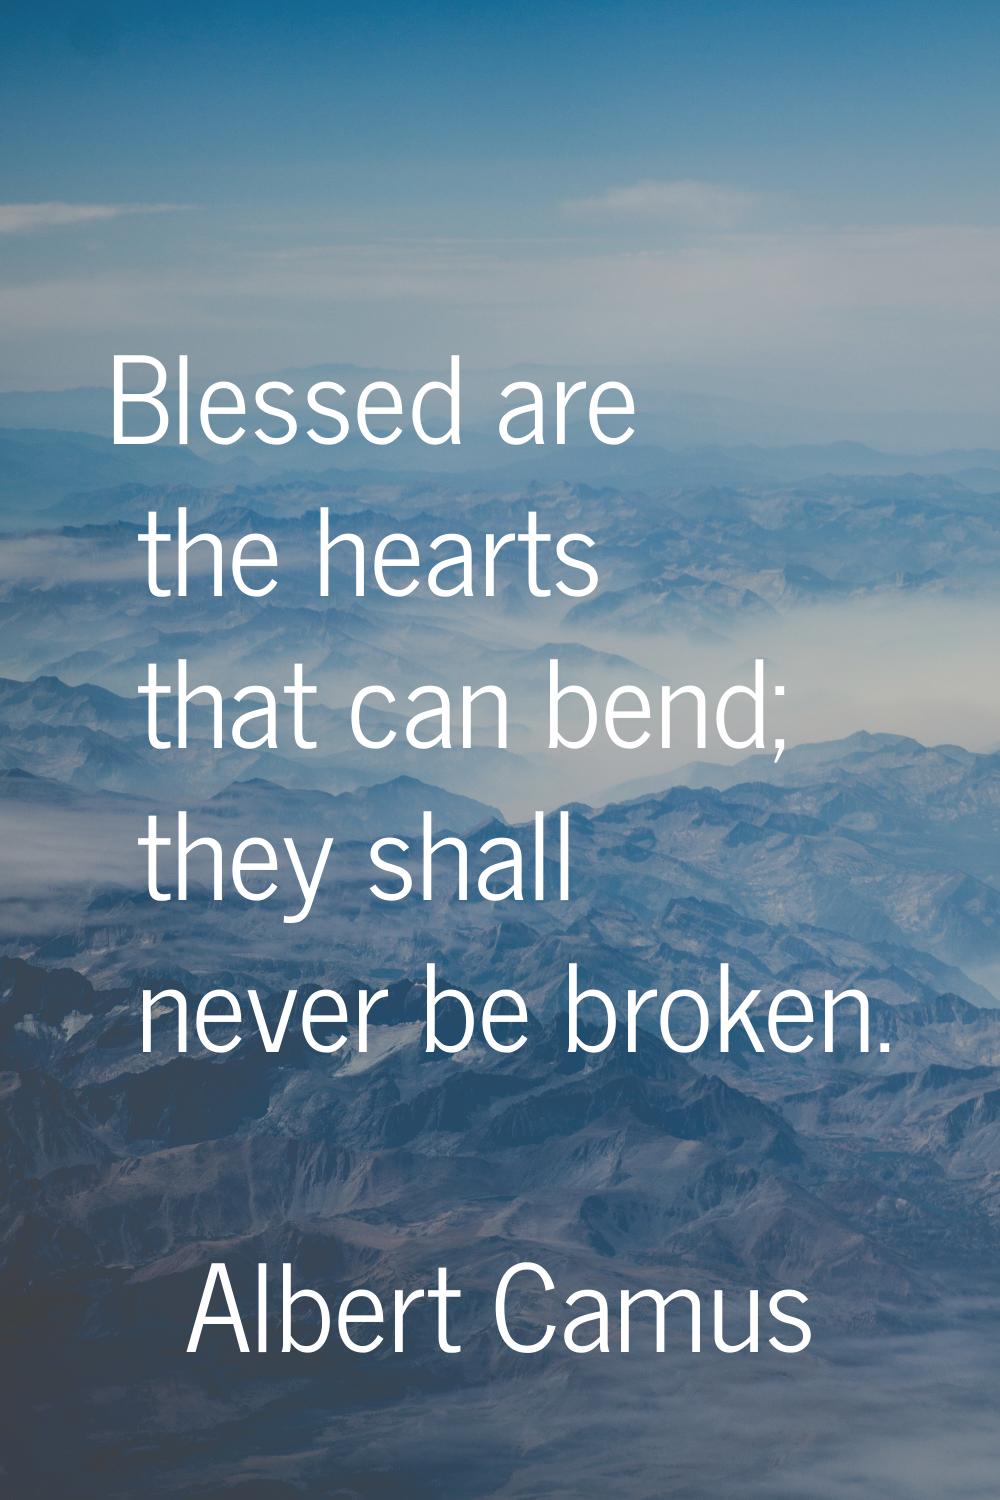 Blessed are the hearts that can bend; they shall never be broken.